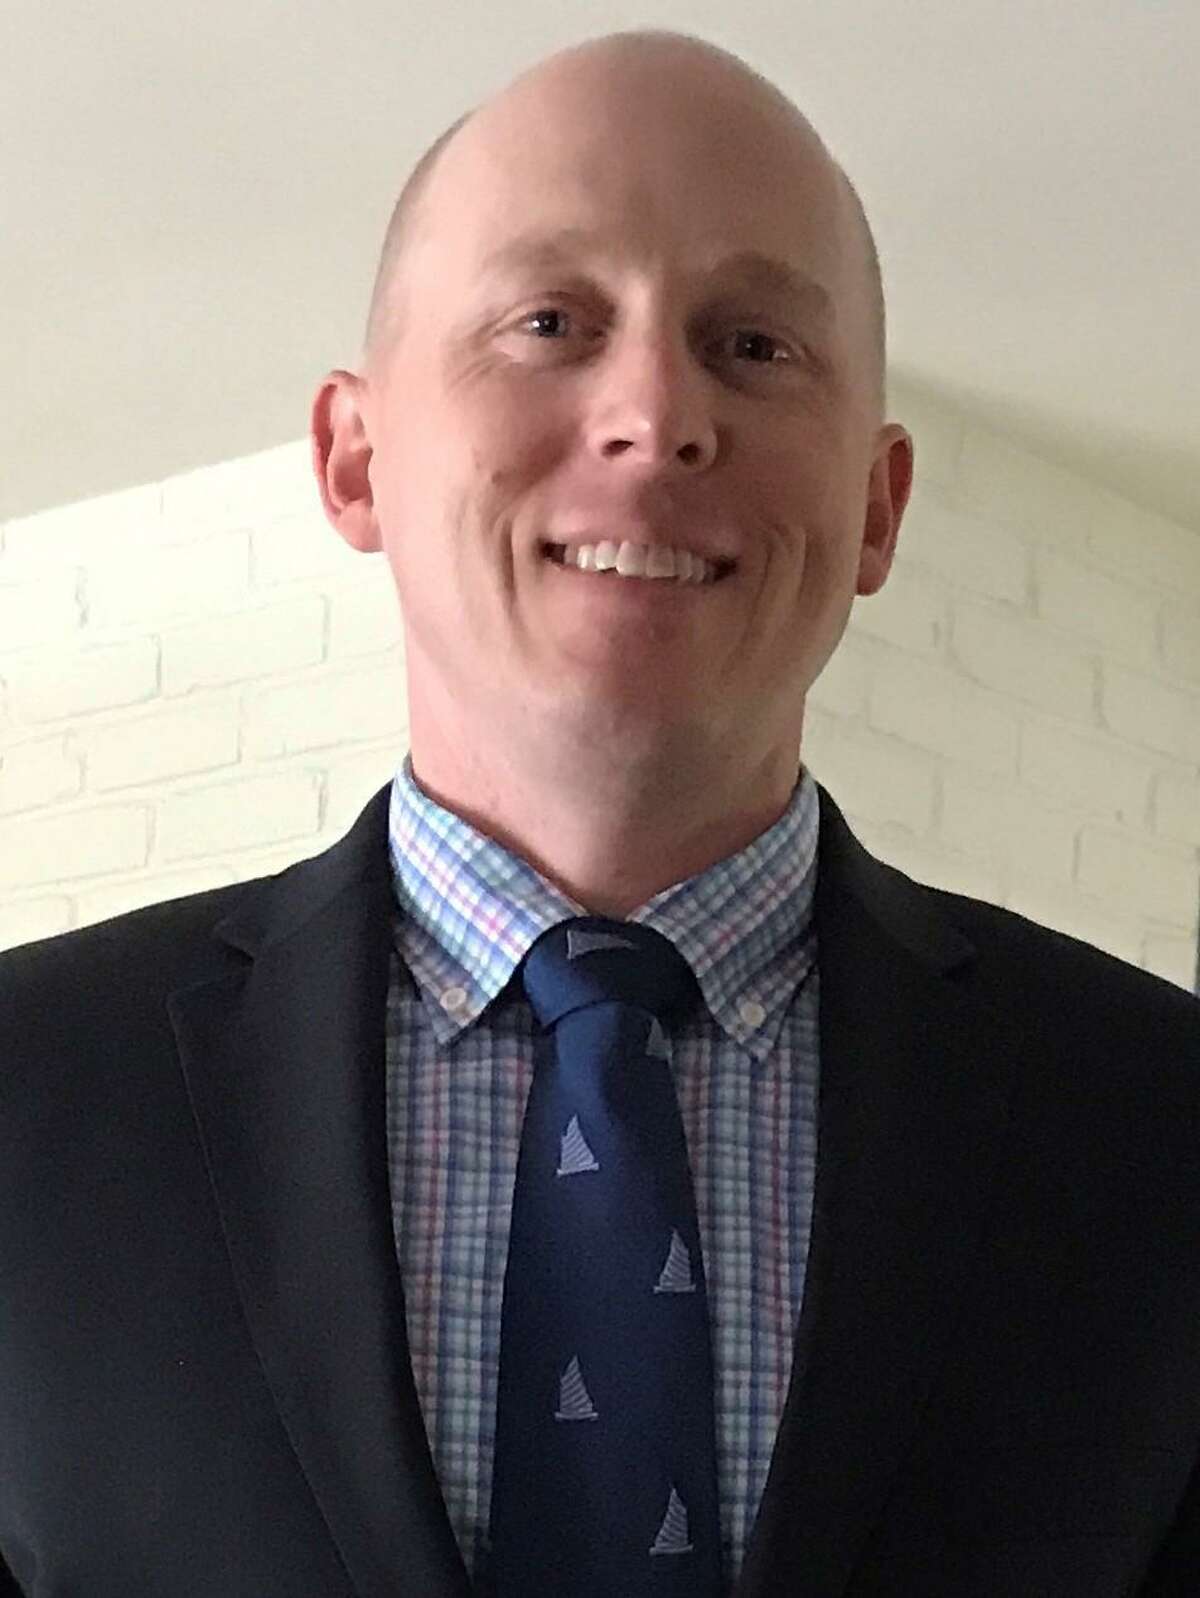 Effective with the 2018-2019 school year Michael Reid will be the Assistant Principal for Cos Cob School.